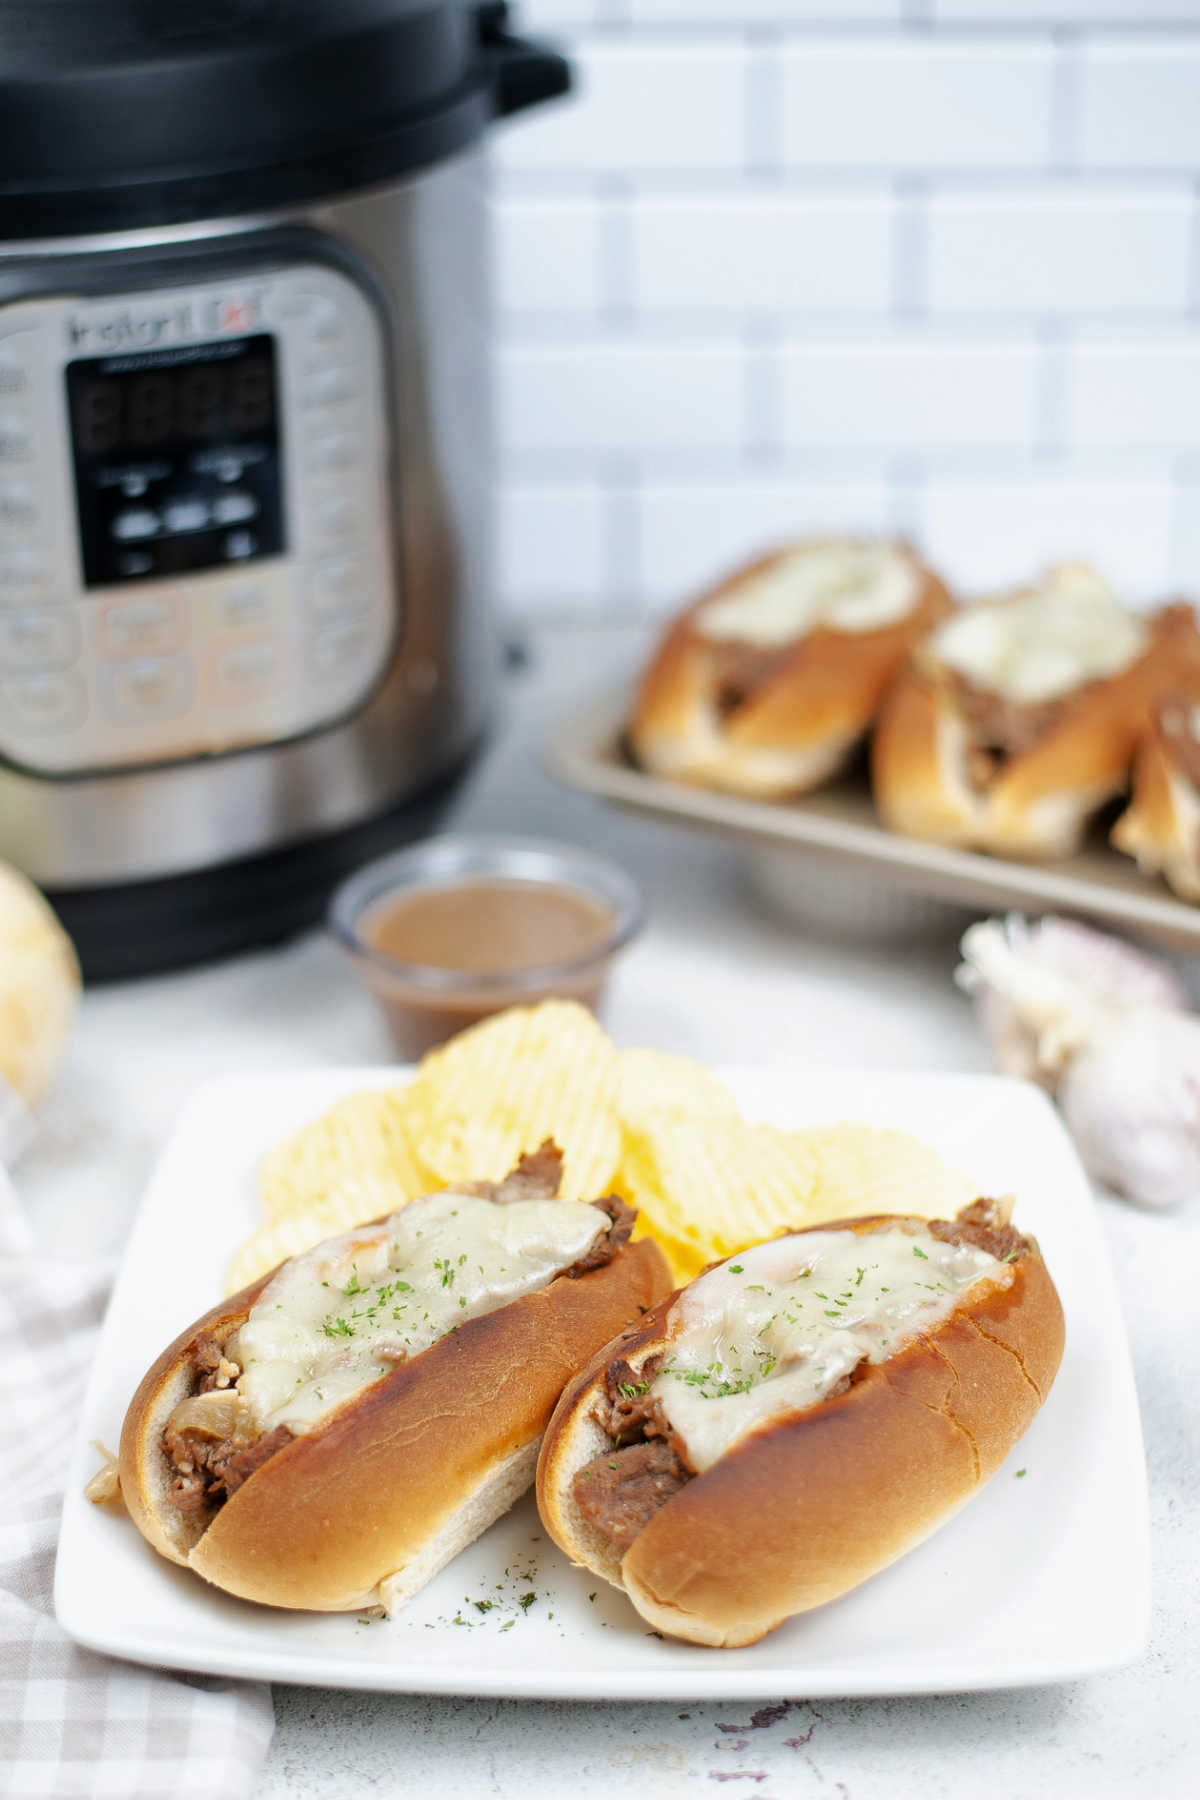 Plate of french dip sandwiches and potato chips in front of instant pot.